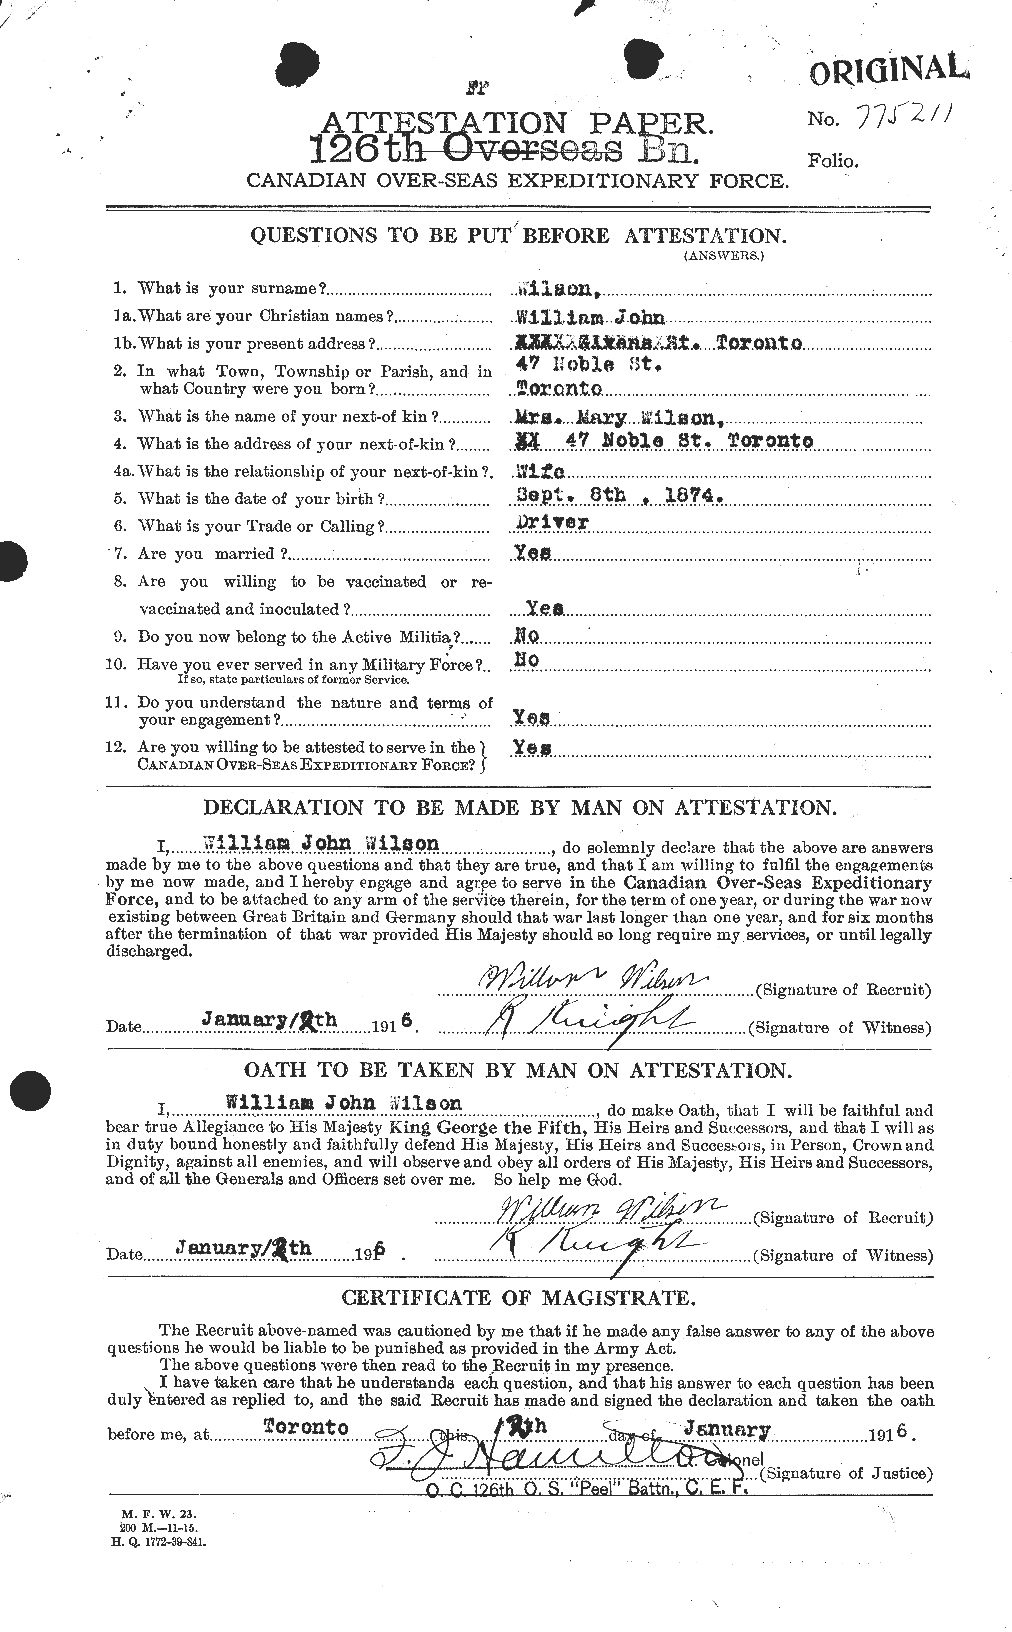 Personnel Records of the First World War - CEF 682054a